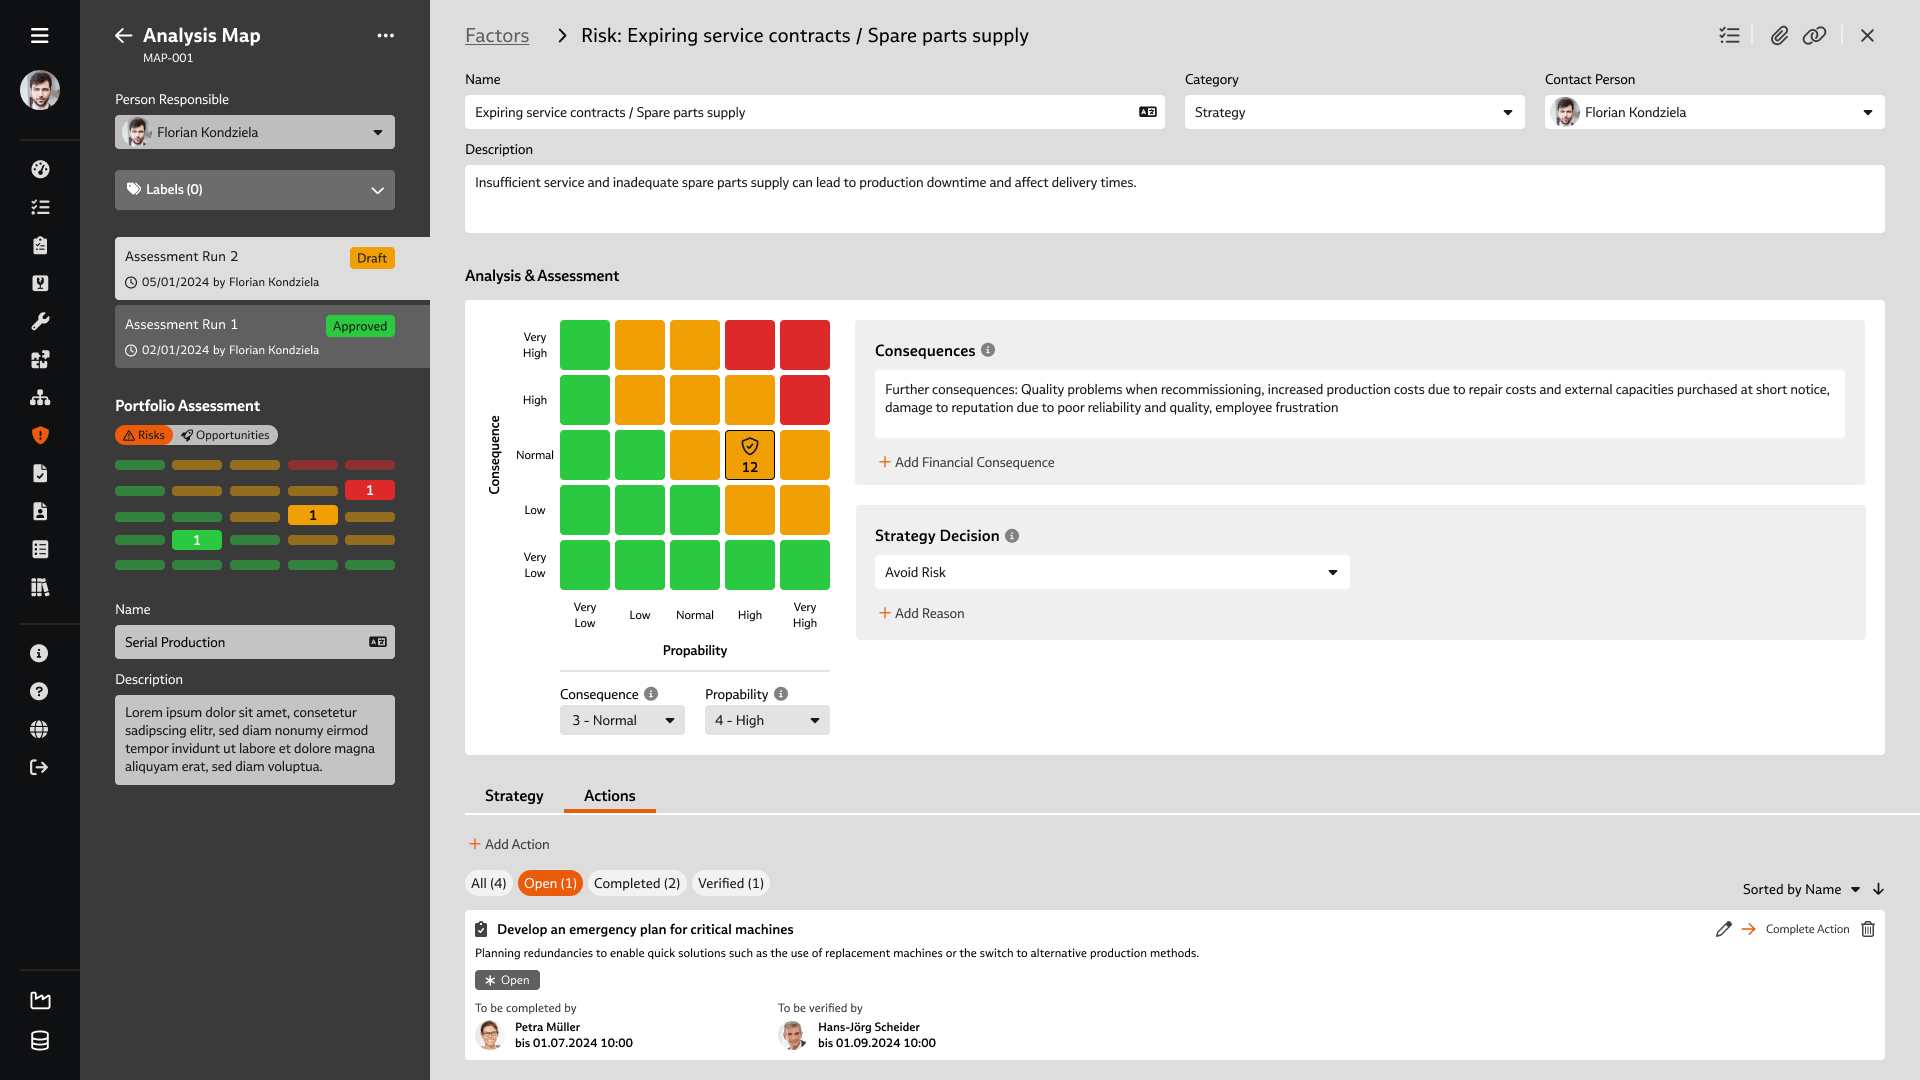 Screenshot of the risk analysis in the "Risk Management" module of the Babtec software